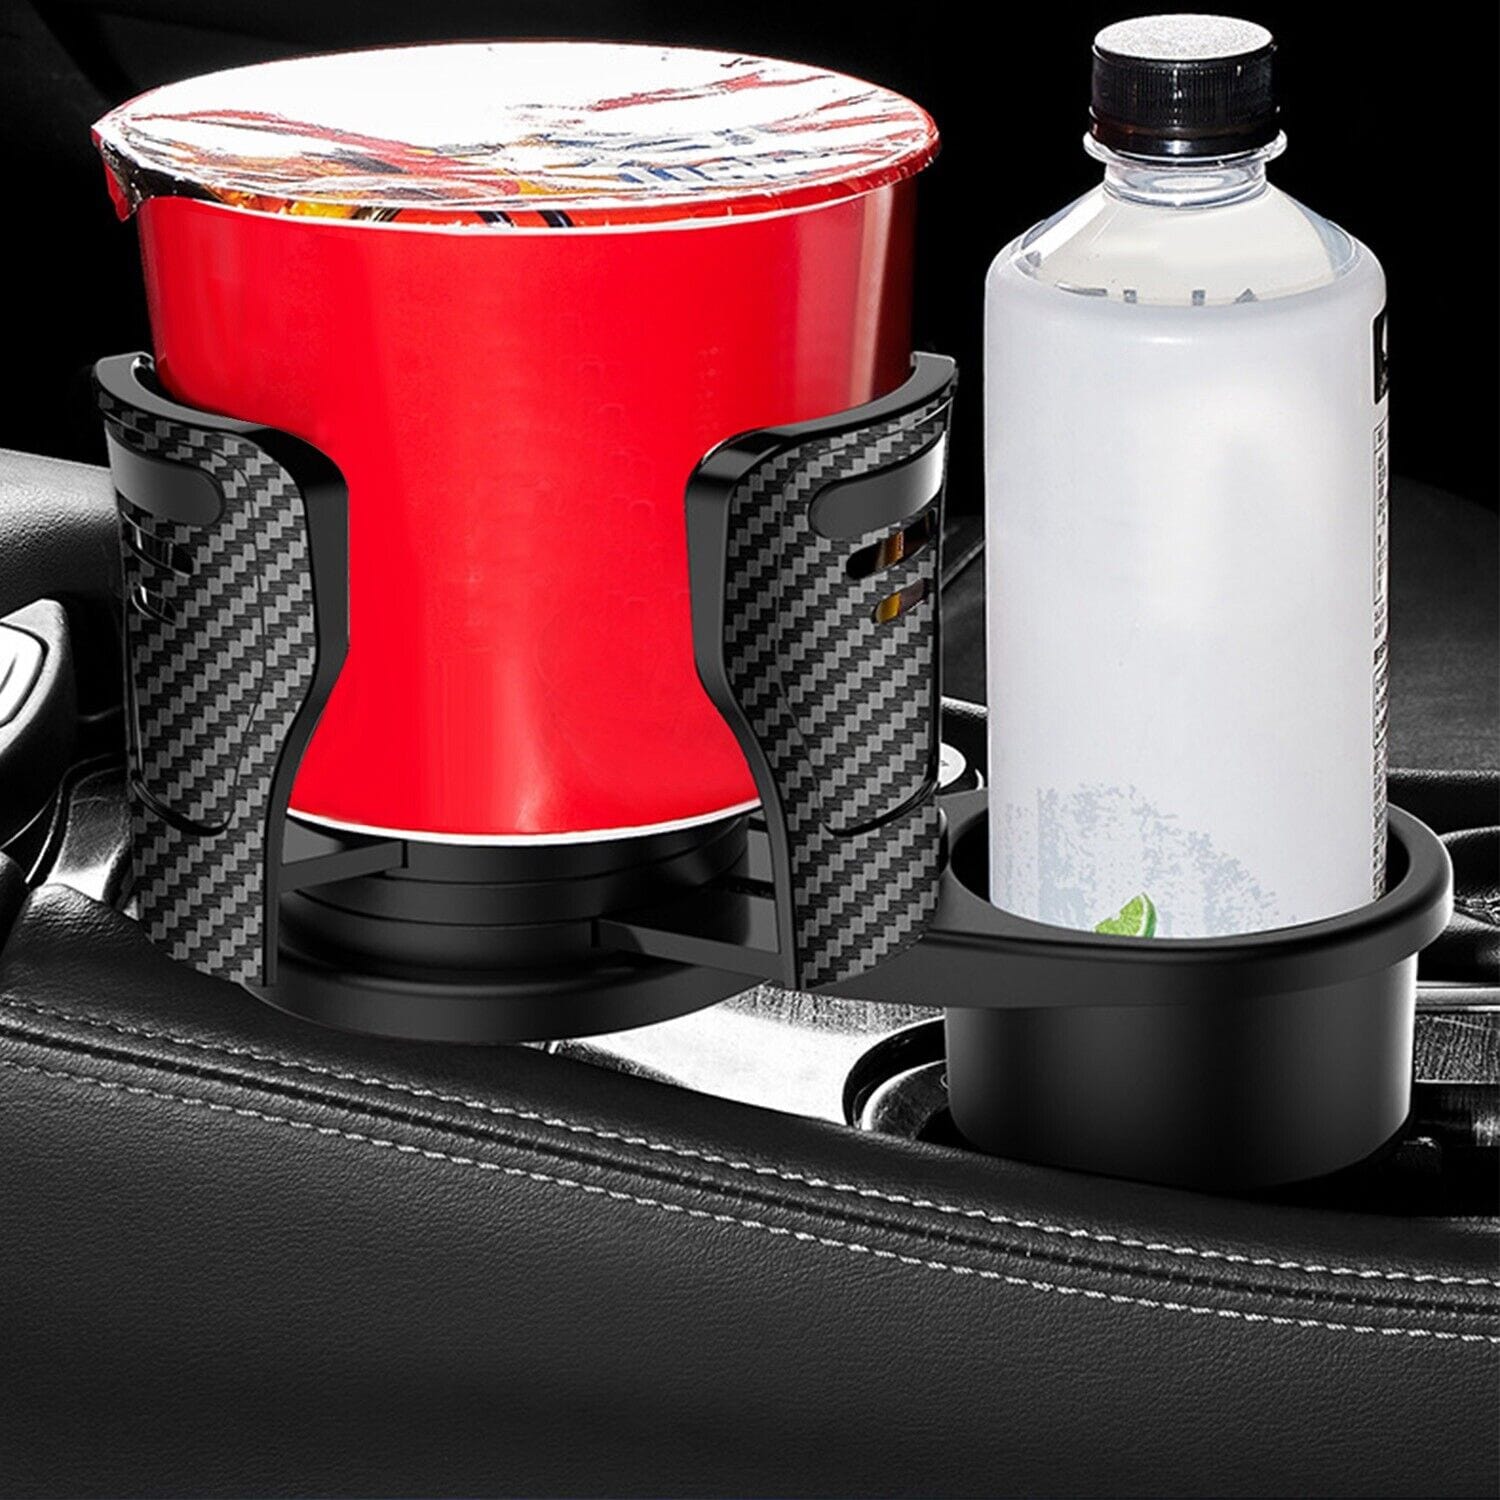 Glass Holder Cups Car Mug Holder Accessories Car Drinks Holder - 2 in 1  Multifunctional Car Drink Cup Glass Holder - 360° Rotatable